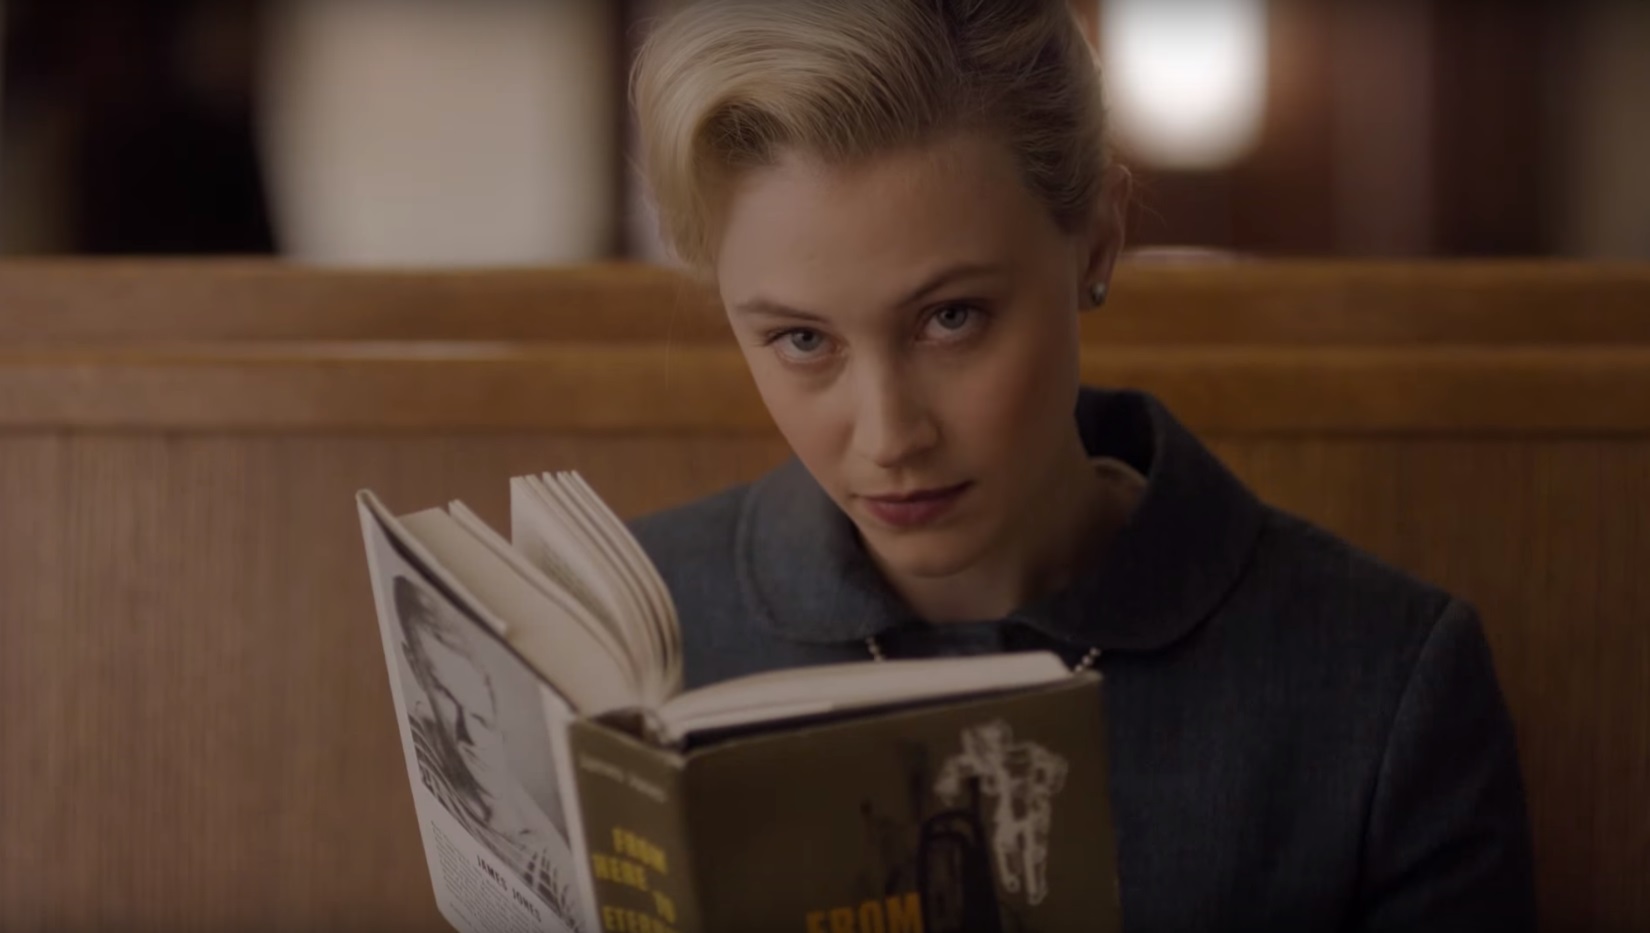 Sadie reads a book and stares at someone off-camera.